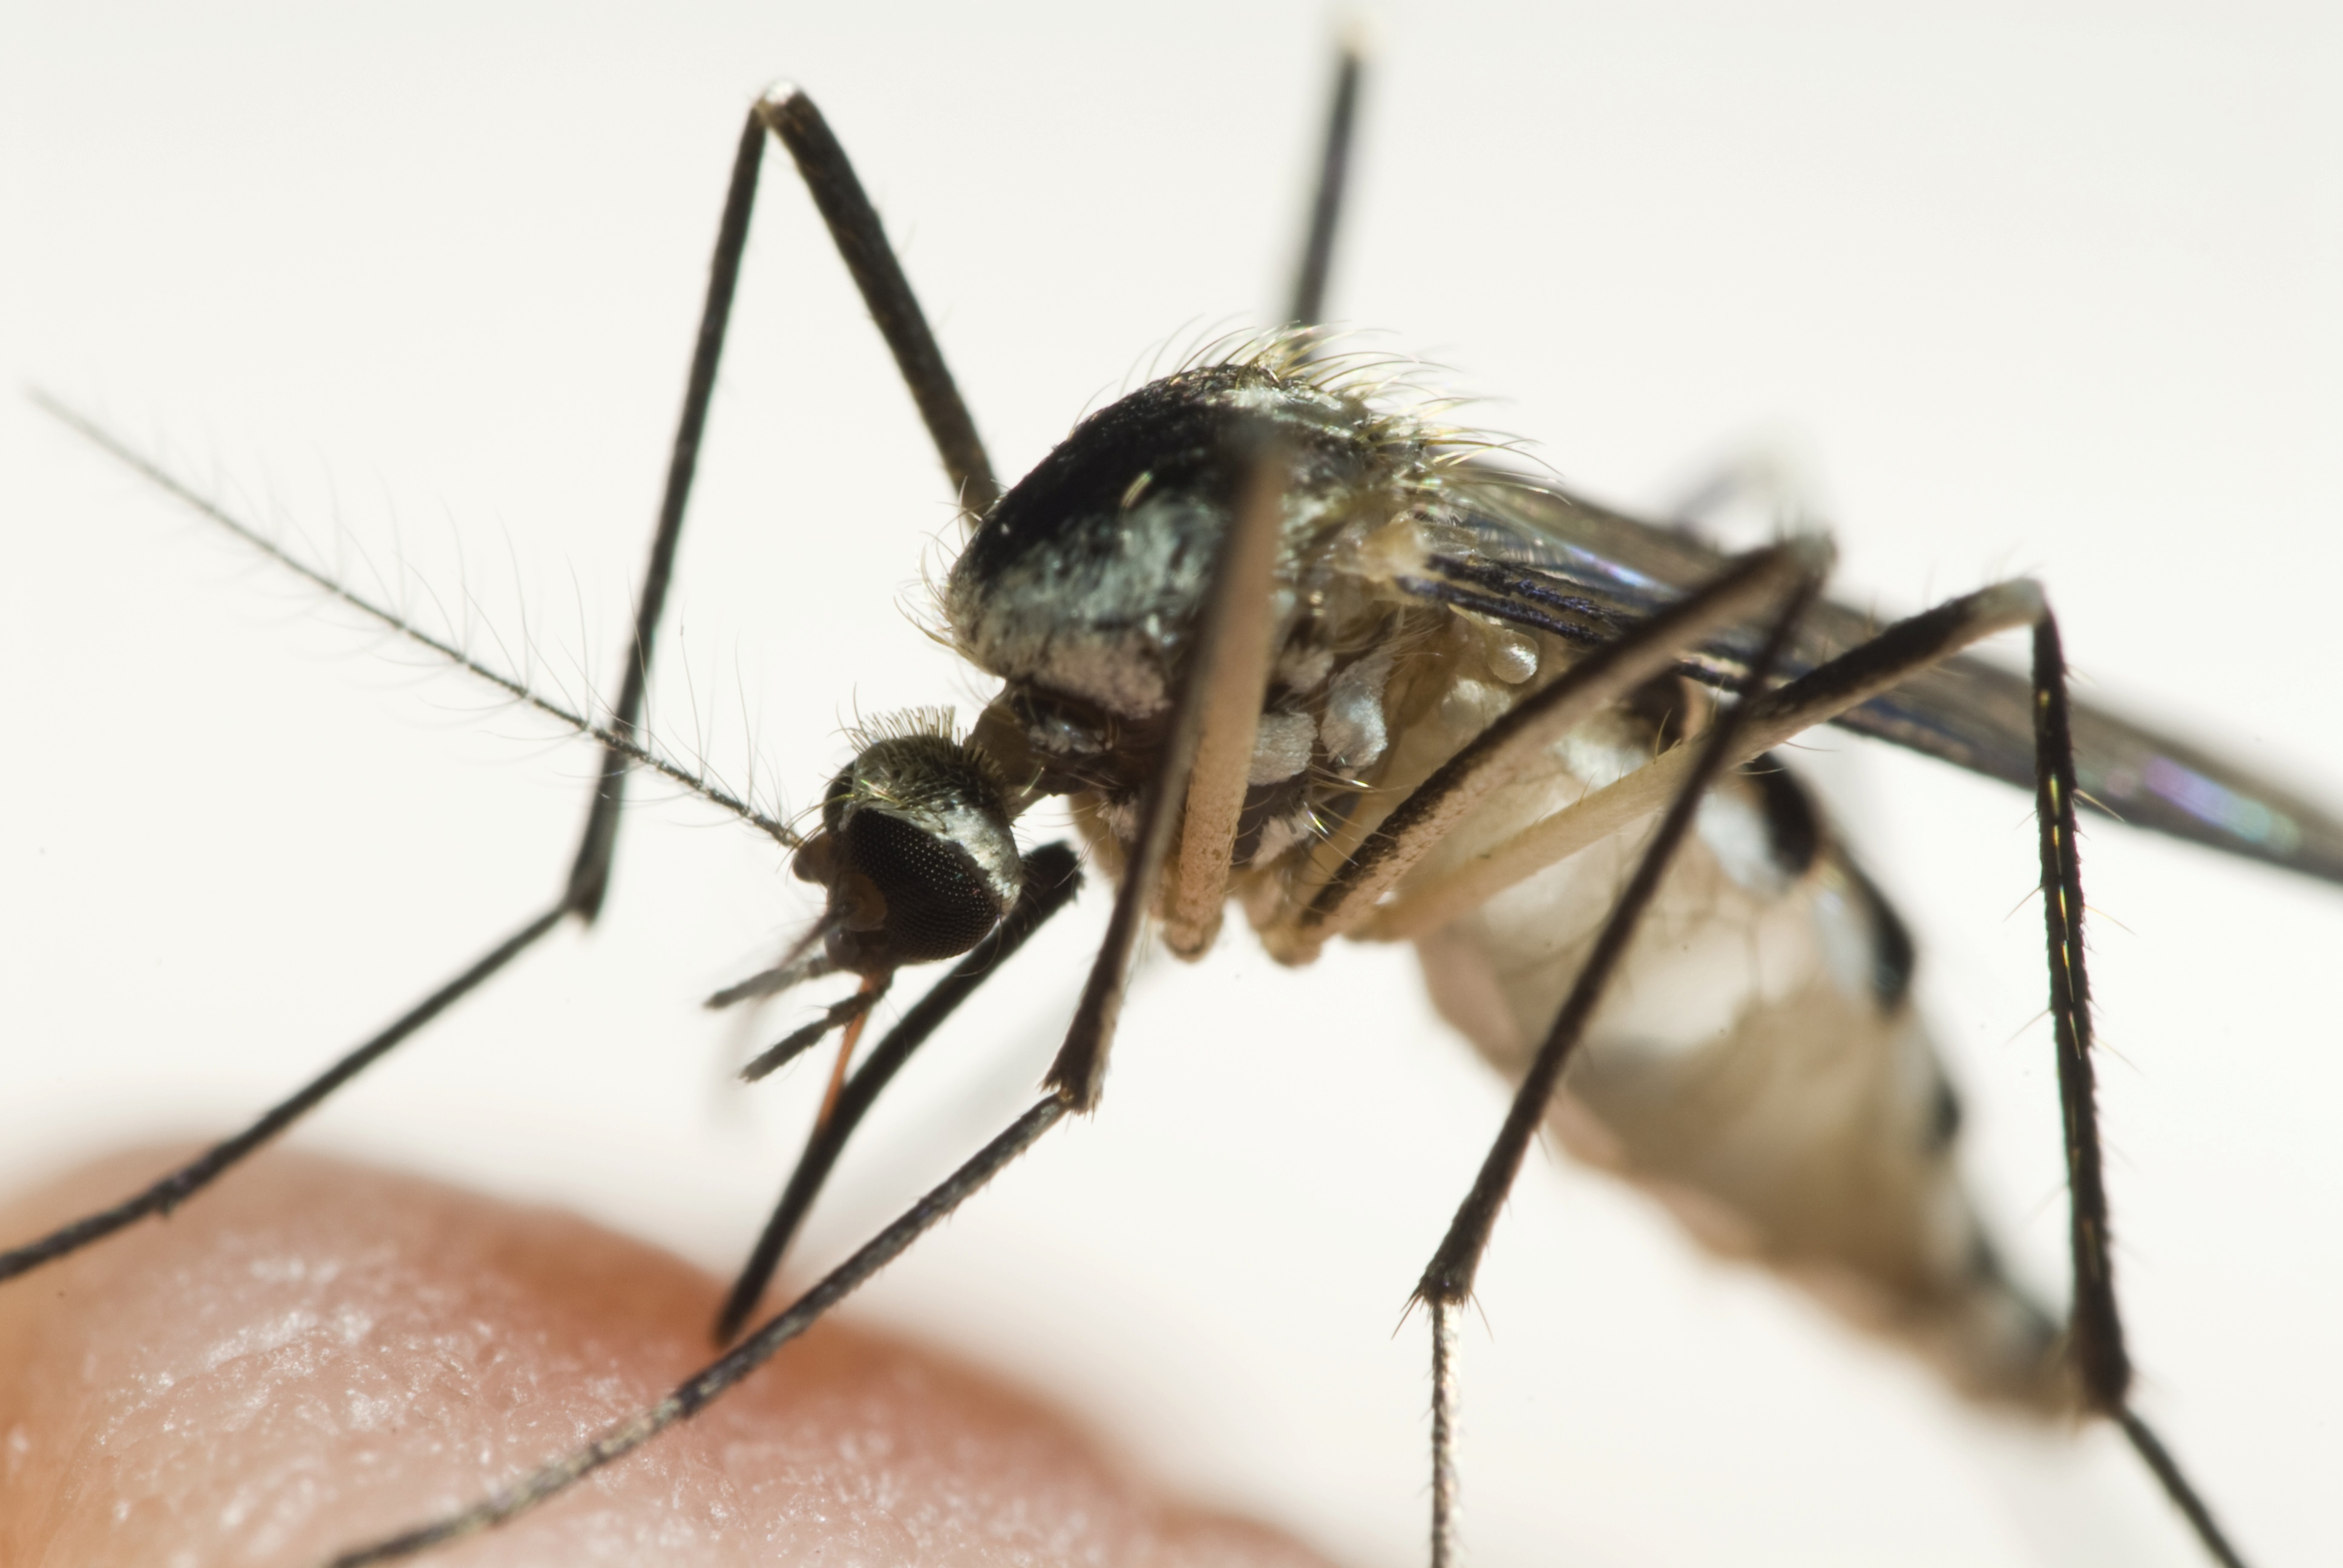 Extreme closeup of mosquito found prior to providing Mosquito Control in Mooresville